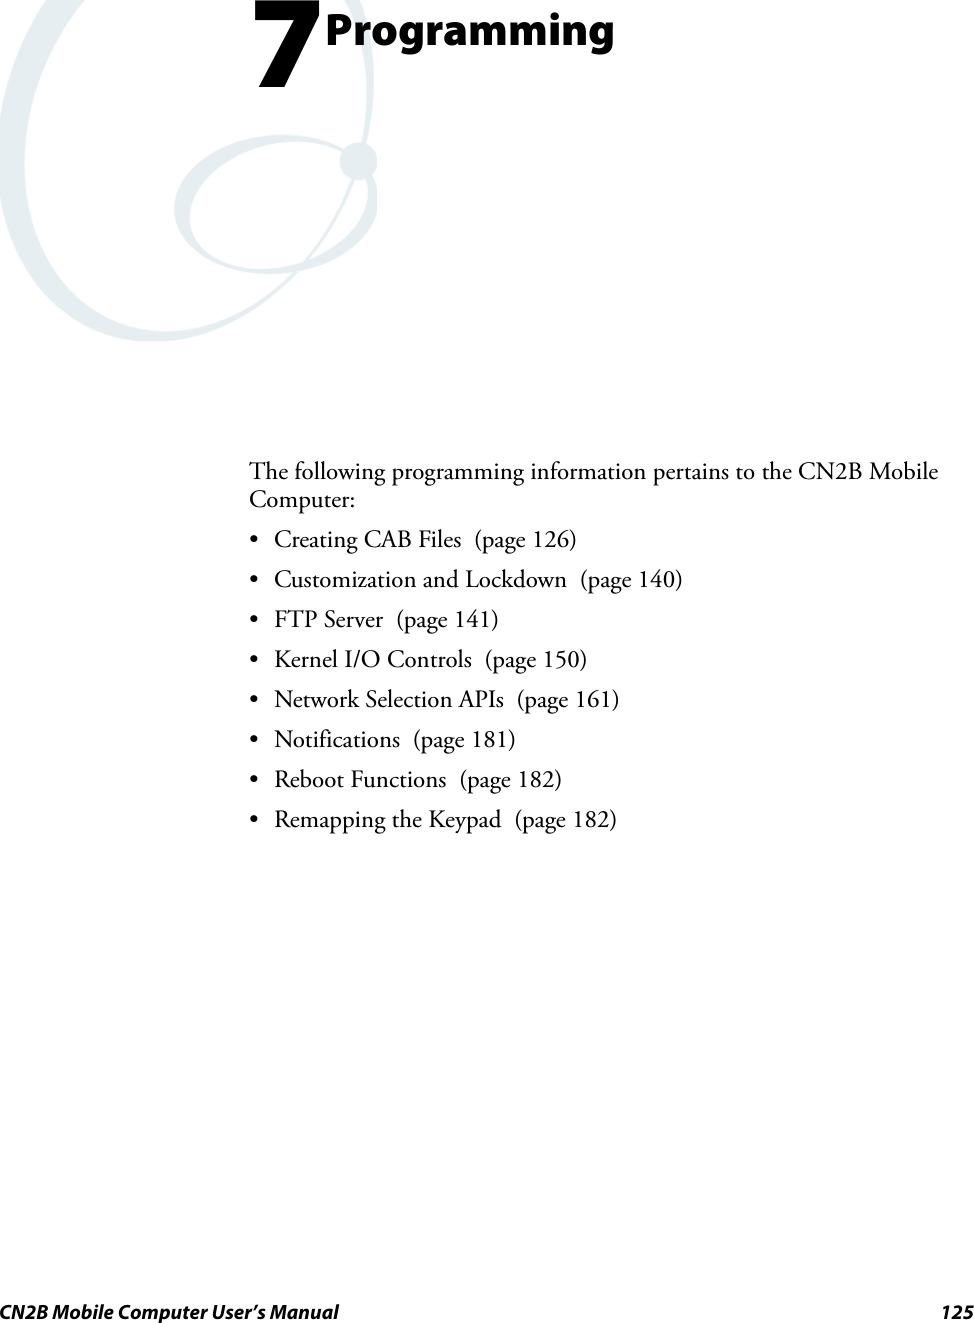 CN2B Mobile Computer User’s Manual 1257ProgrammingThe following programming information pertains to the CN2B Mobile Computer:• Creating CAB Files  (page 126)• Customization and Lockdown  (page 140)• FTP Server  (page 141)• Kernel I/O Controls  (page 150)• Network Selection APIs  (page 161)• Notifications (page 181)• Reboot Functions  (page 182)• Remapping the Keypad  (page 182)